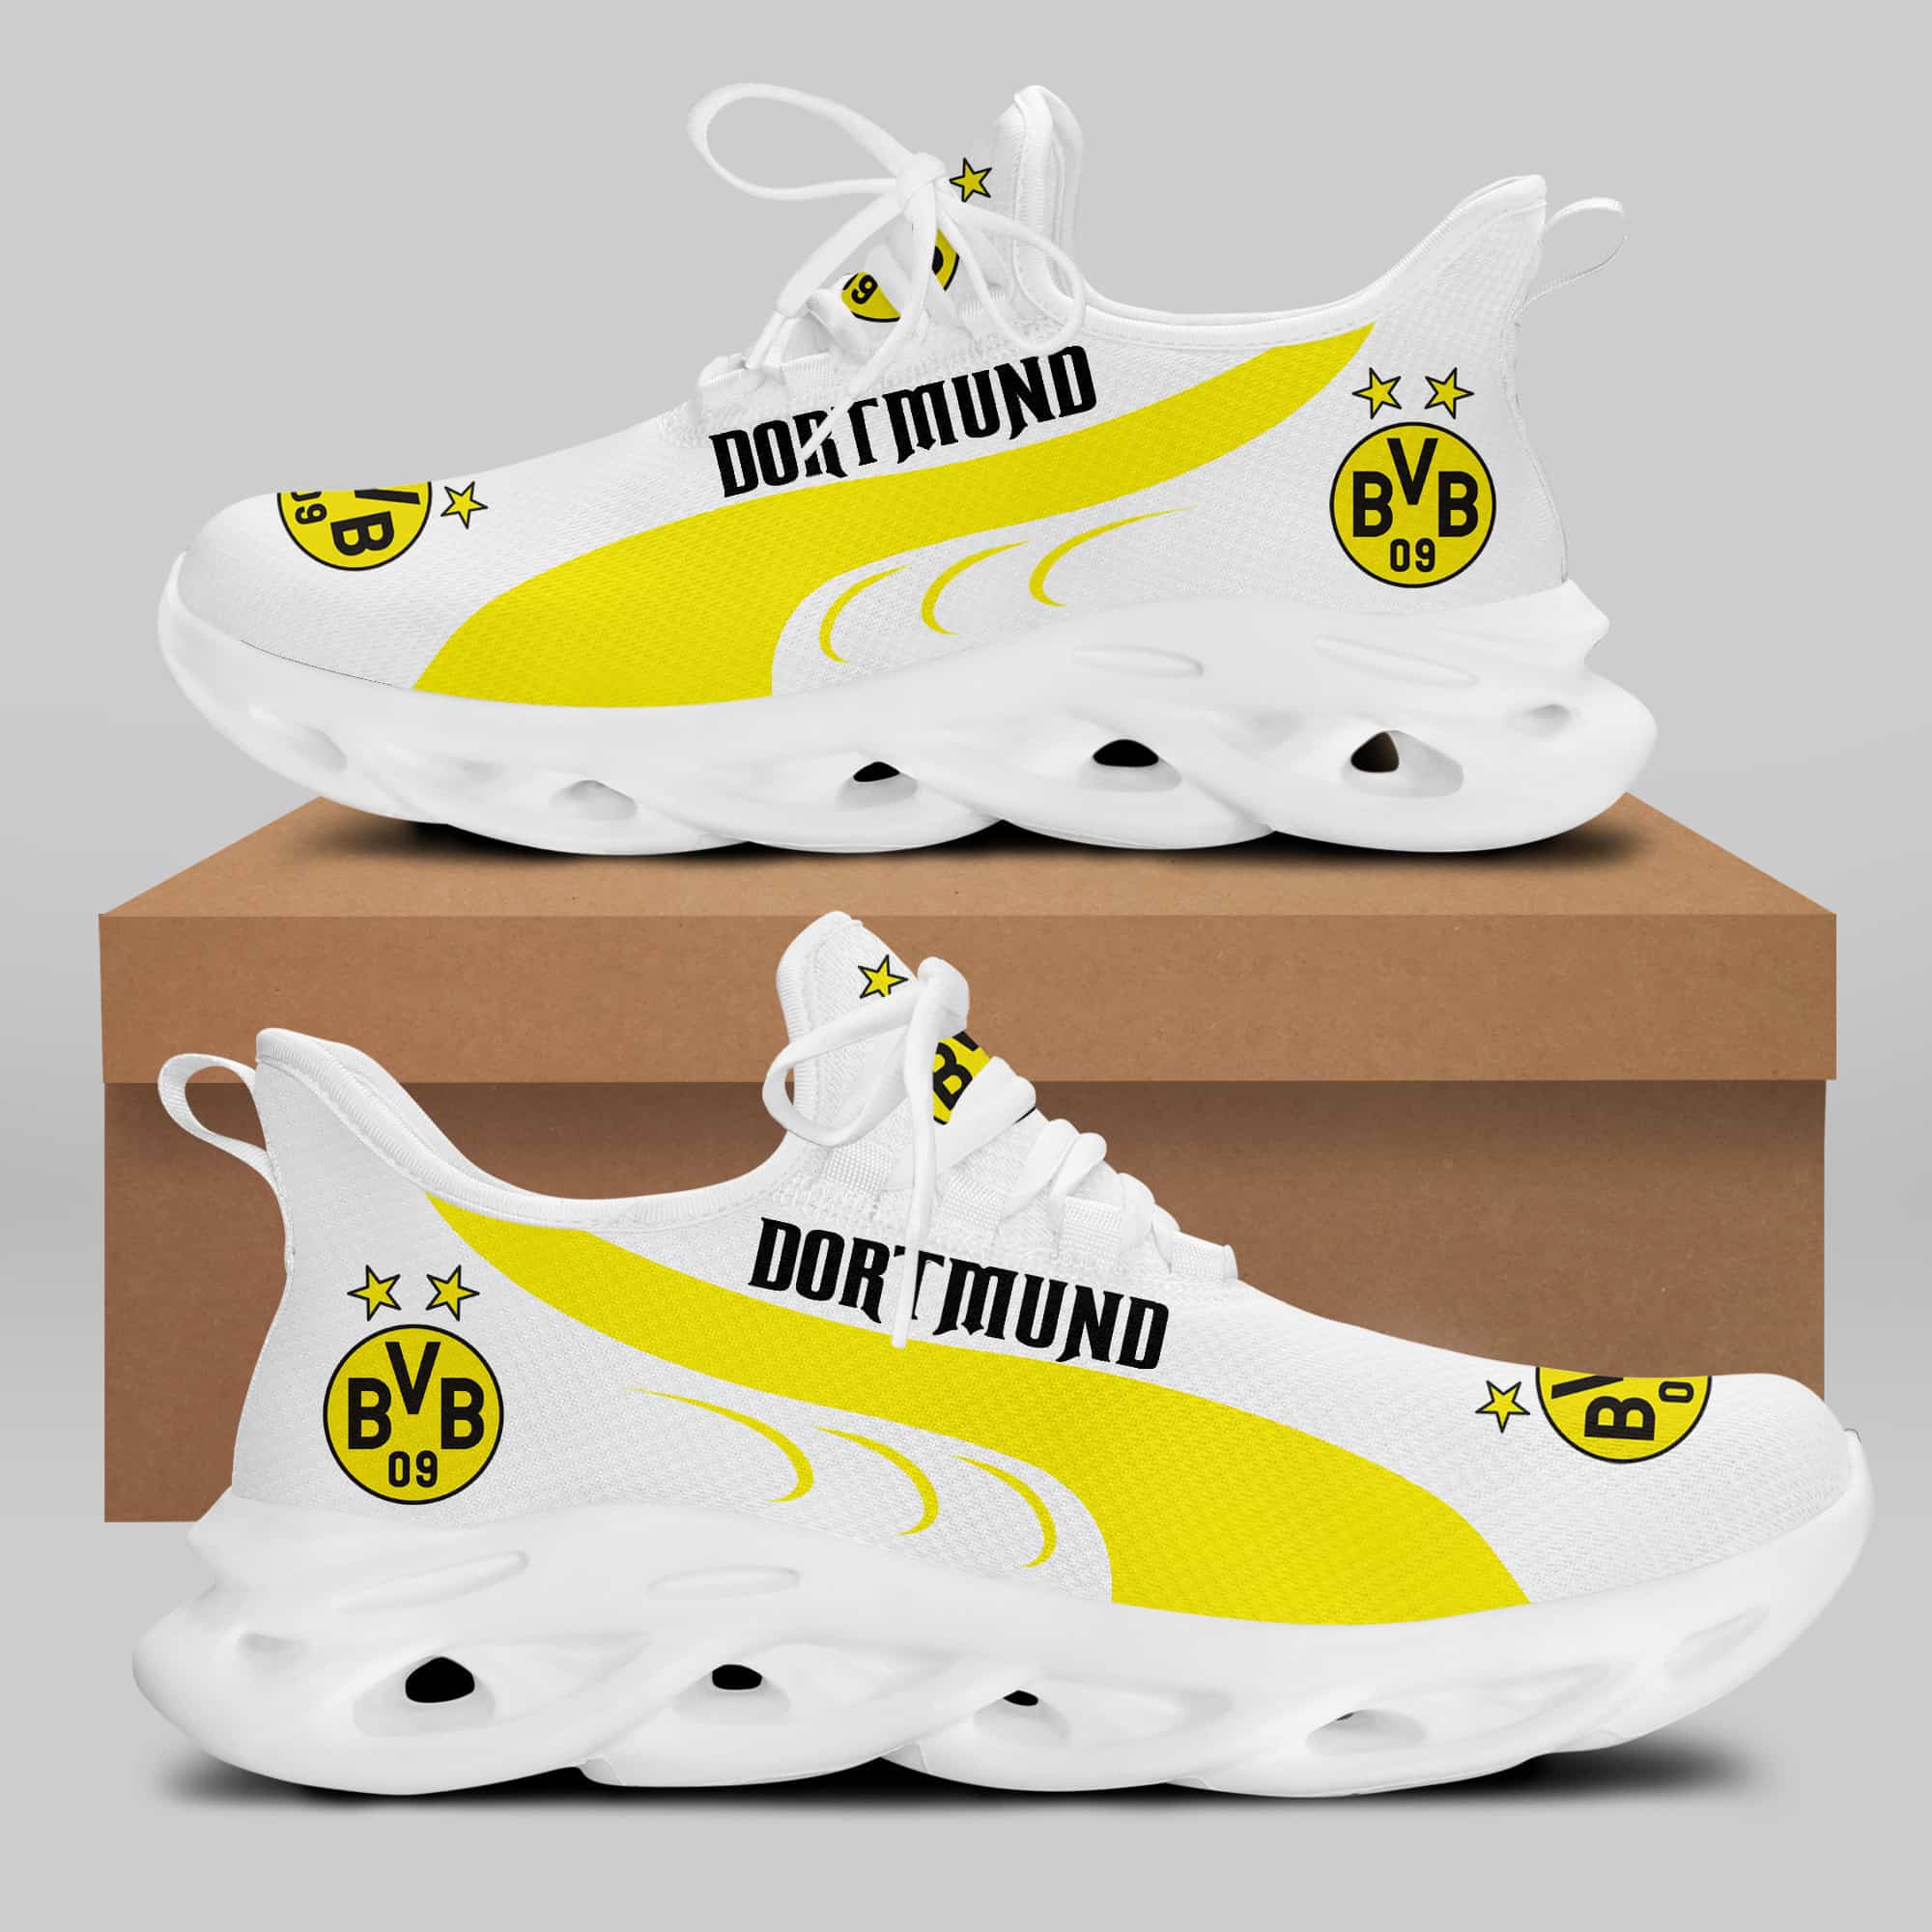 Borussia Dortmund Running Shoes Max Soul Shoes Sneakers Ver 7 2